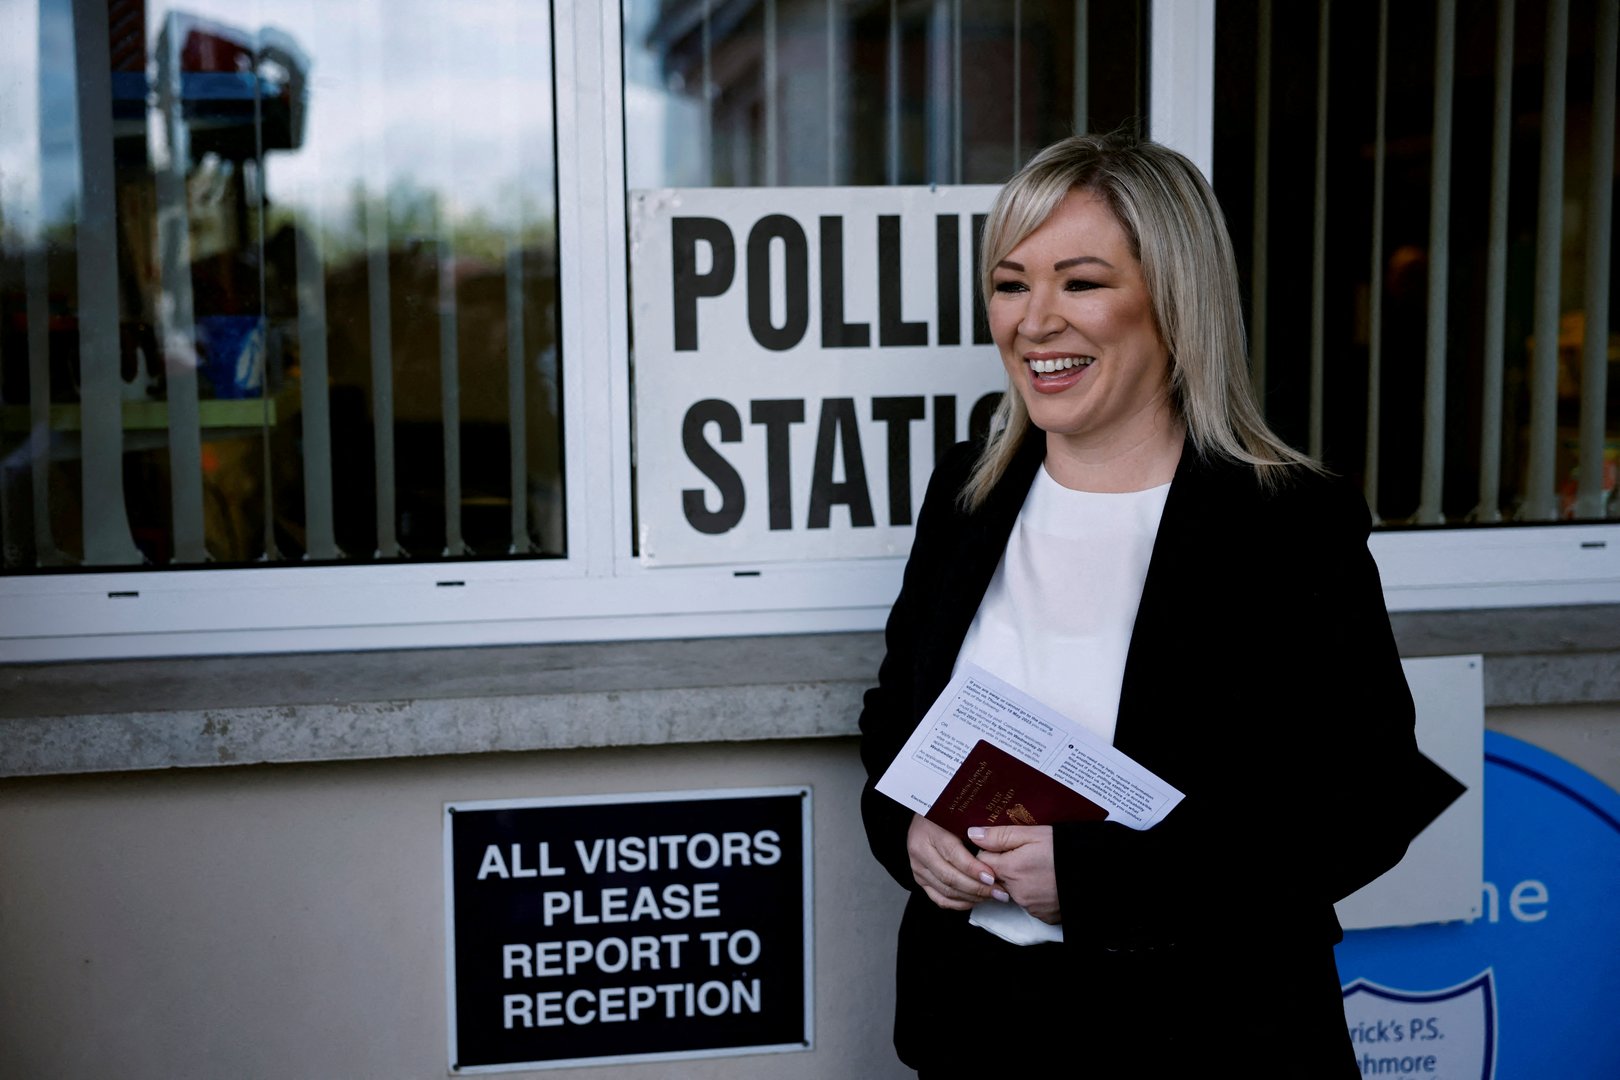 image In historic first, a Sinn Fein leader becomes Northern Irish first minister